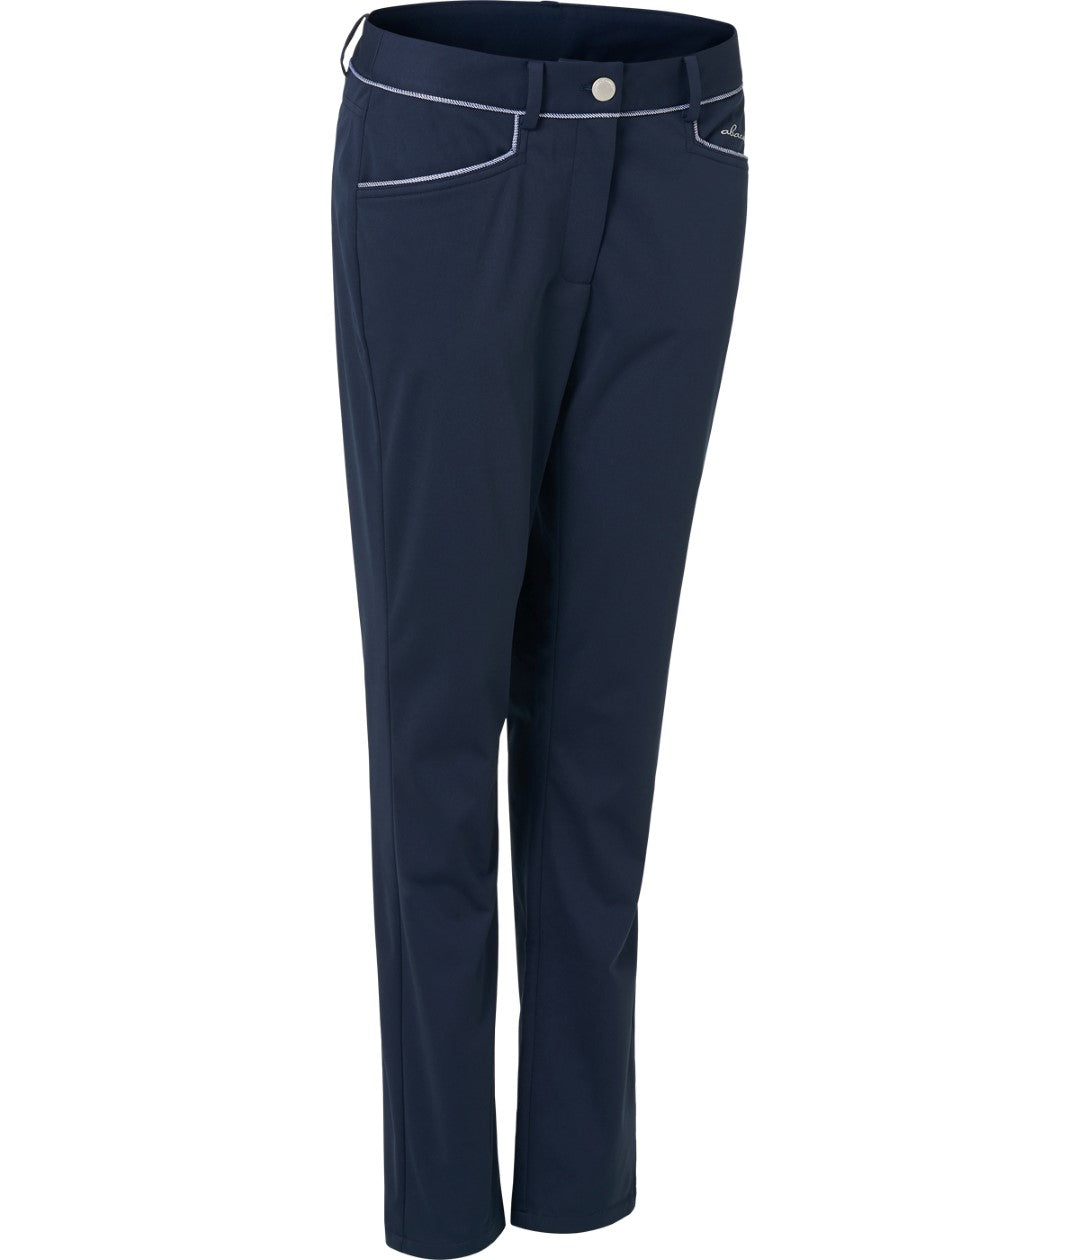 Women warm, windproof and water repellent Tralee trousers - Mercantile Mountain